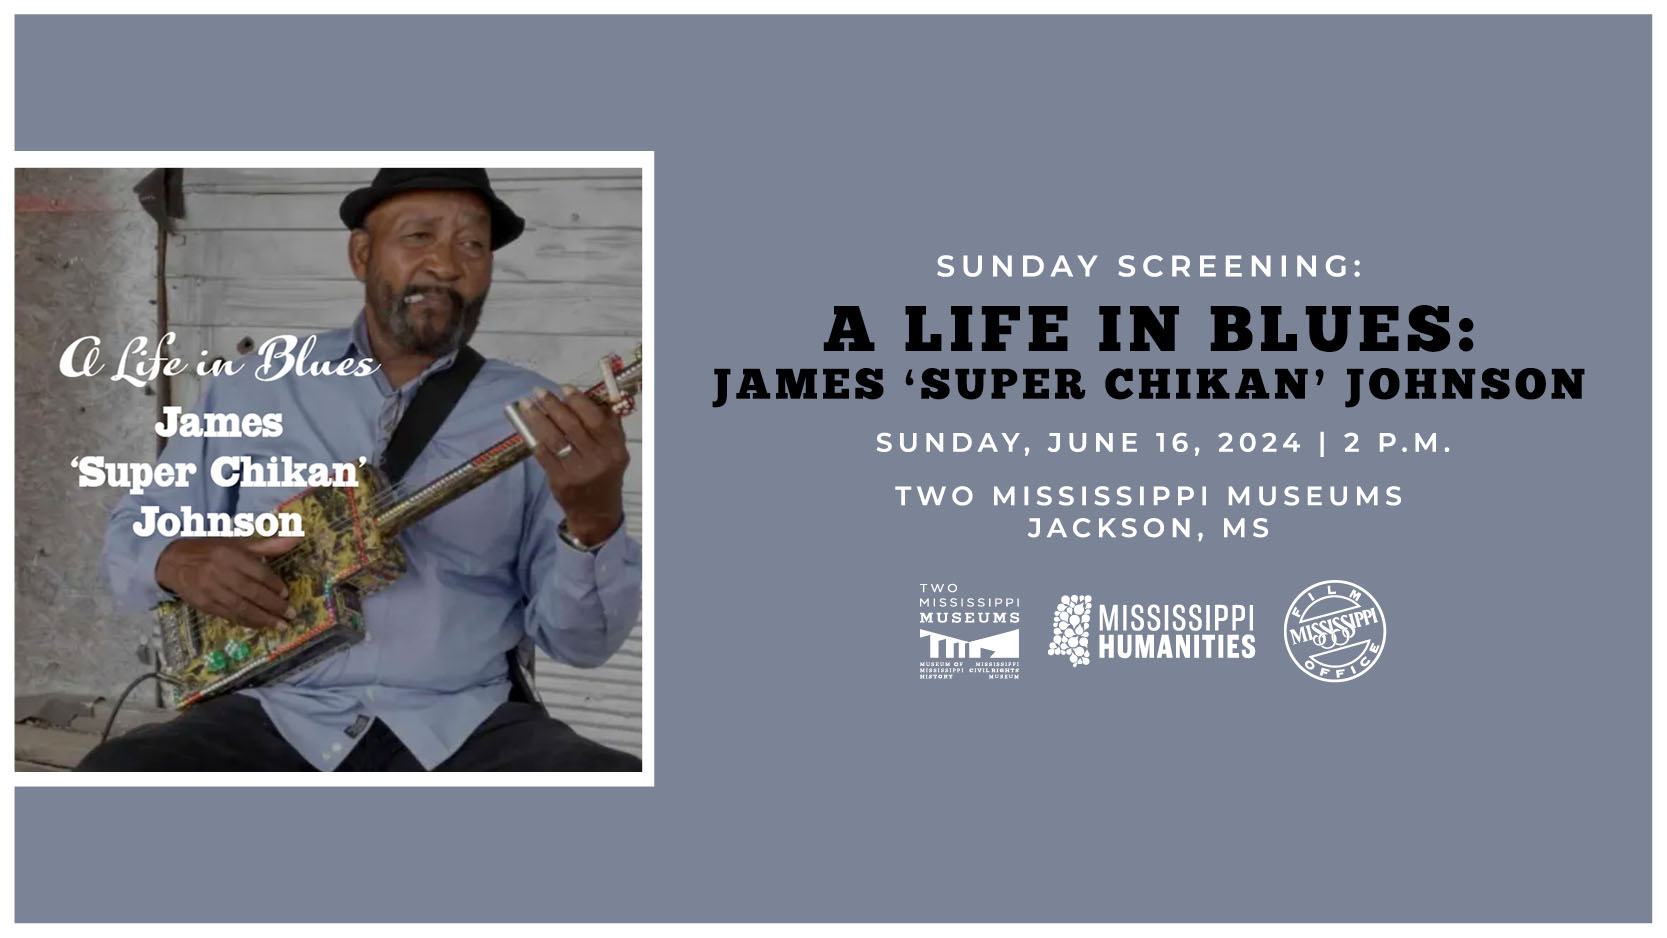 Sunday Screening of James ‘Super Chikan’ Johnson: A Life in Blues